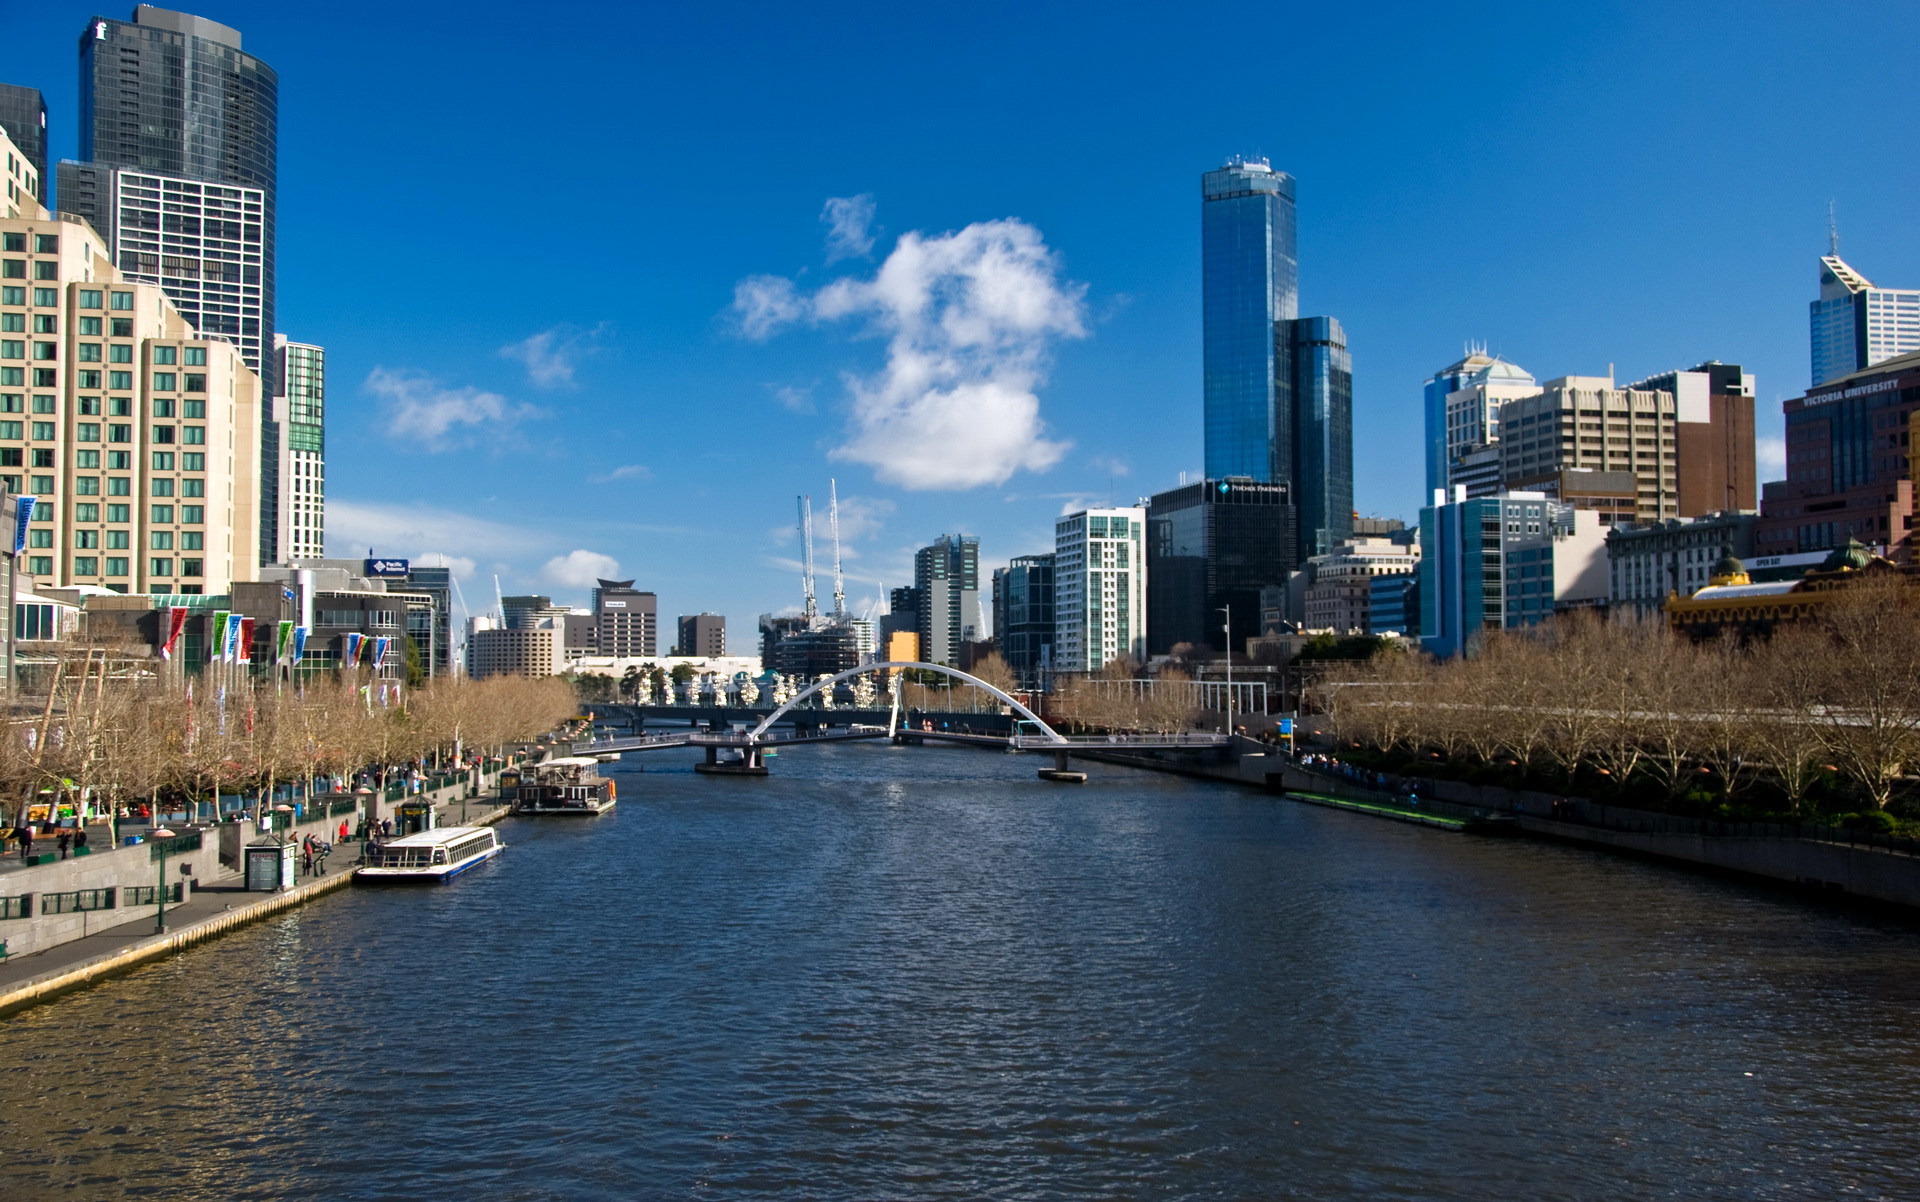 Wallpapers Australia Sky Clouds Melbourne Cities Image #308834 ...